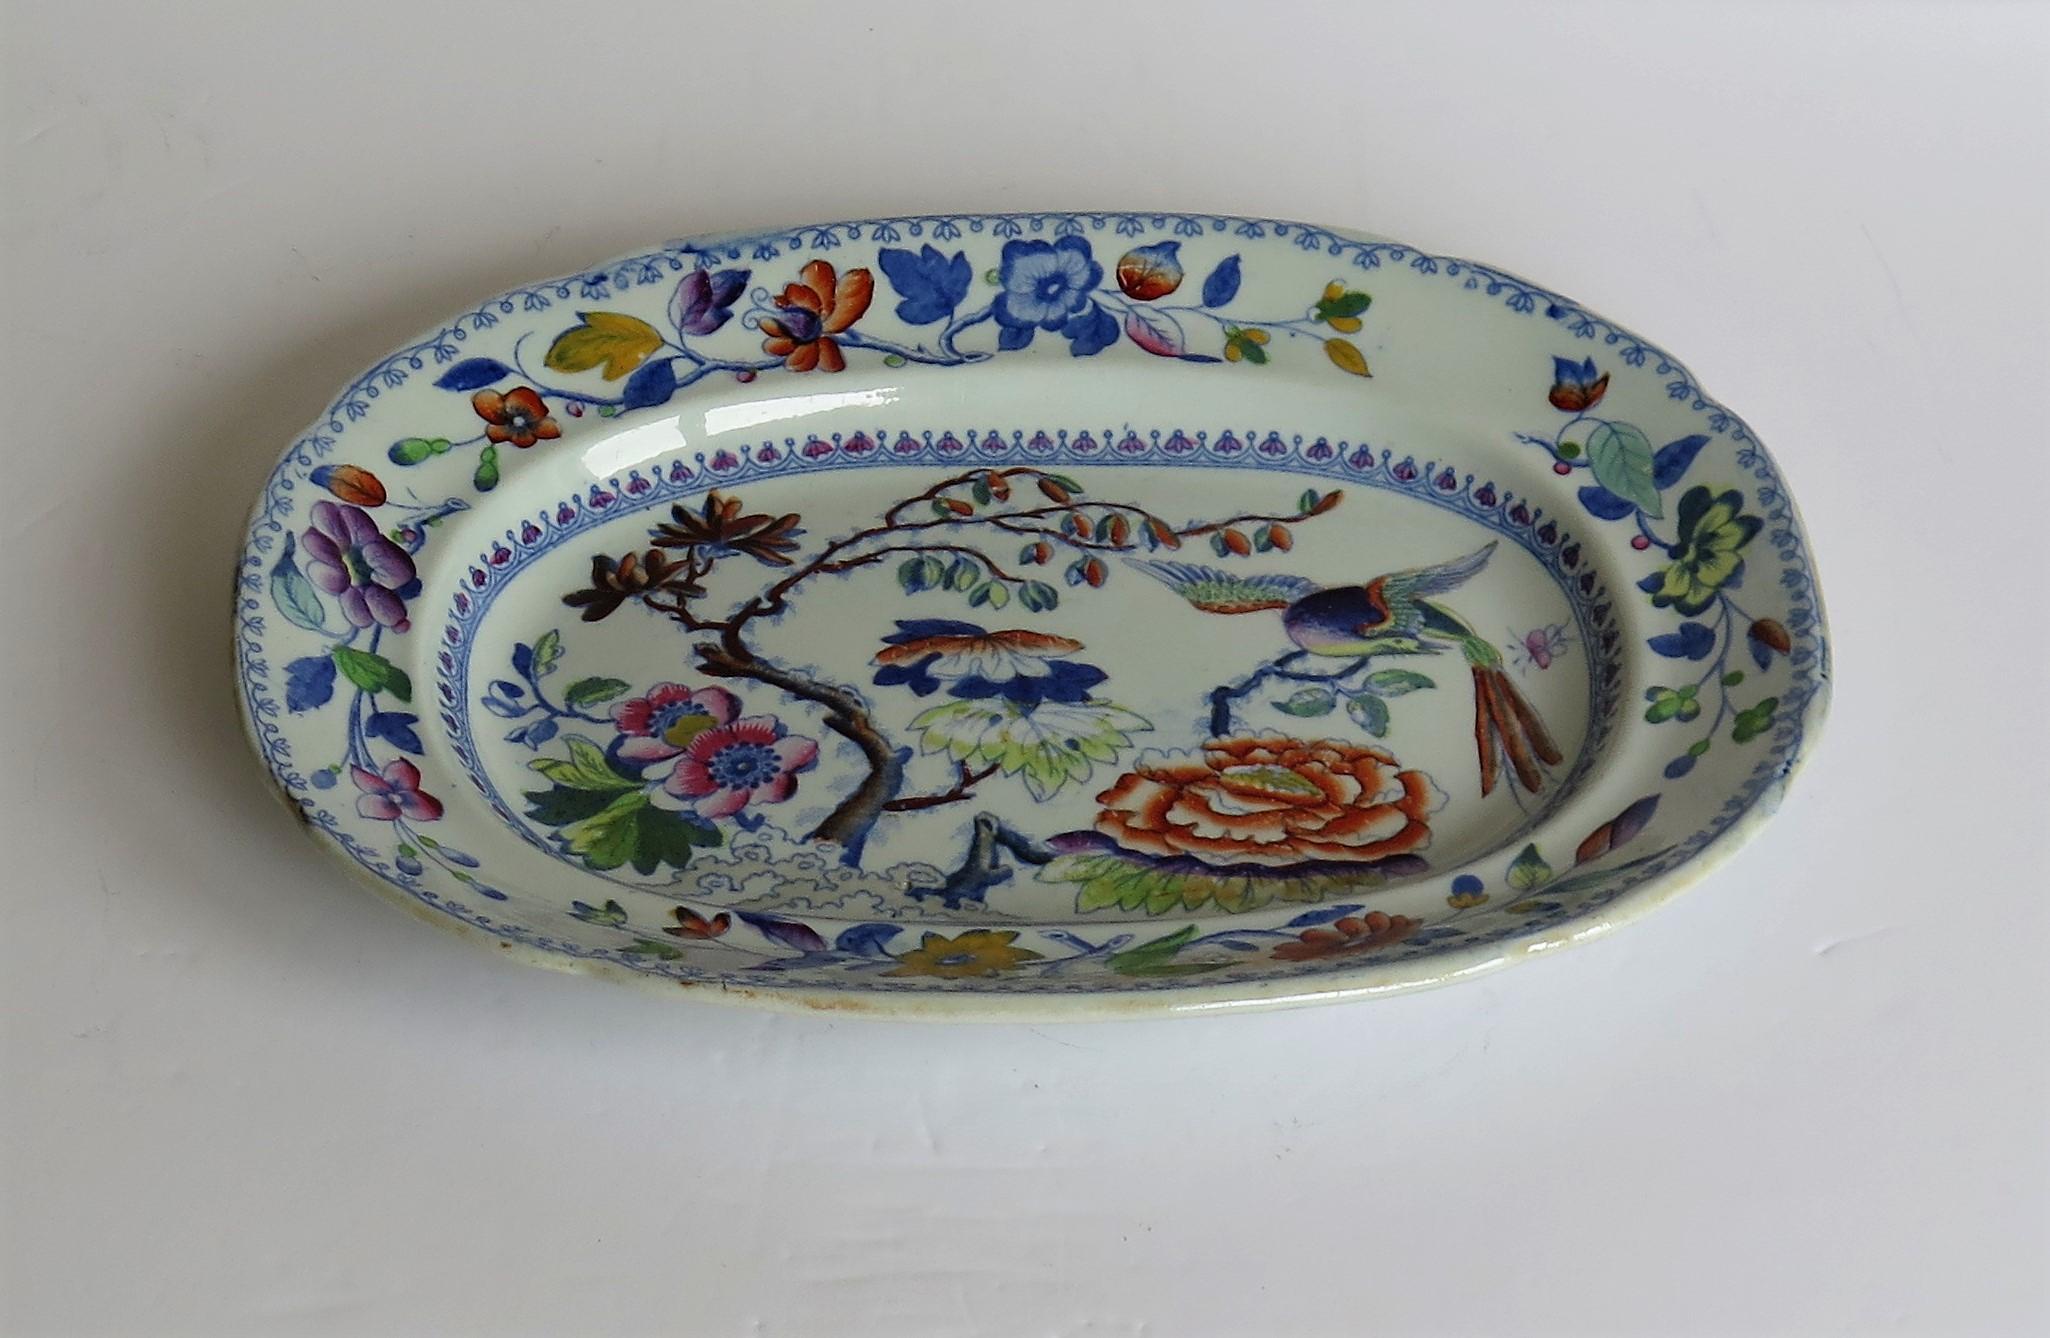 This is a good hand painted ironstone (stone china) Platter, made by William Davenport and Co., Longport, Staffordshire Potteries, England, circa 1820.

The platter is well potted and hand painted, probably over a blue printed outline, in